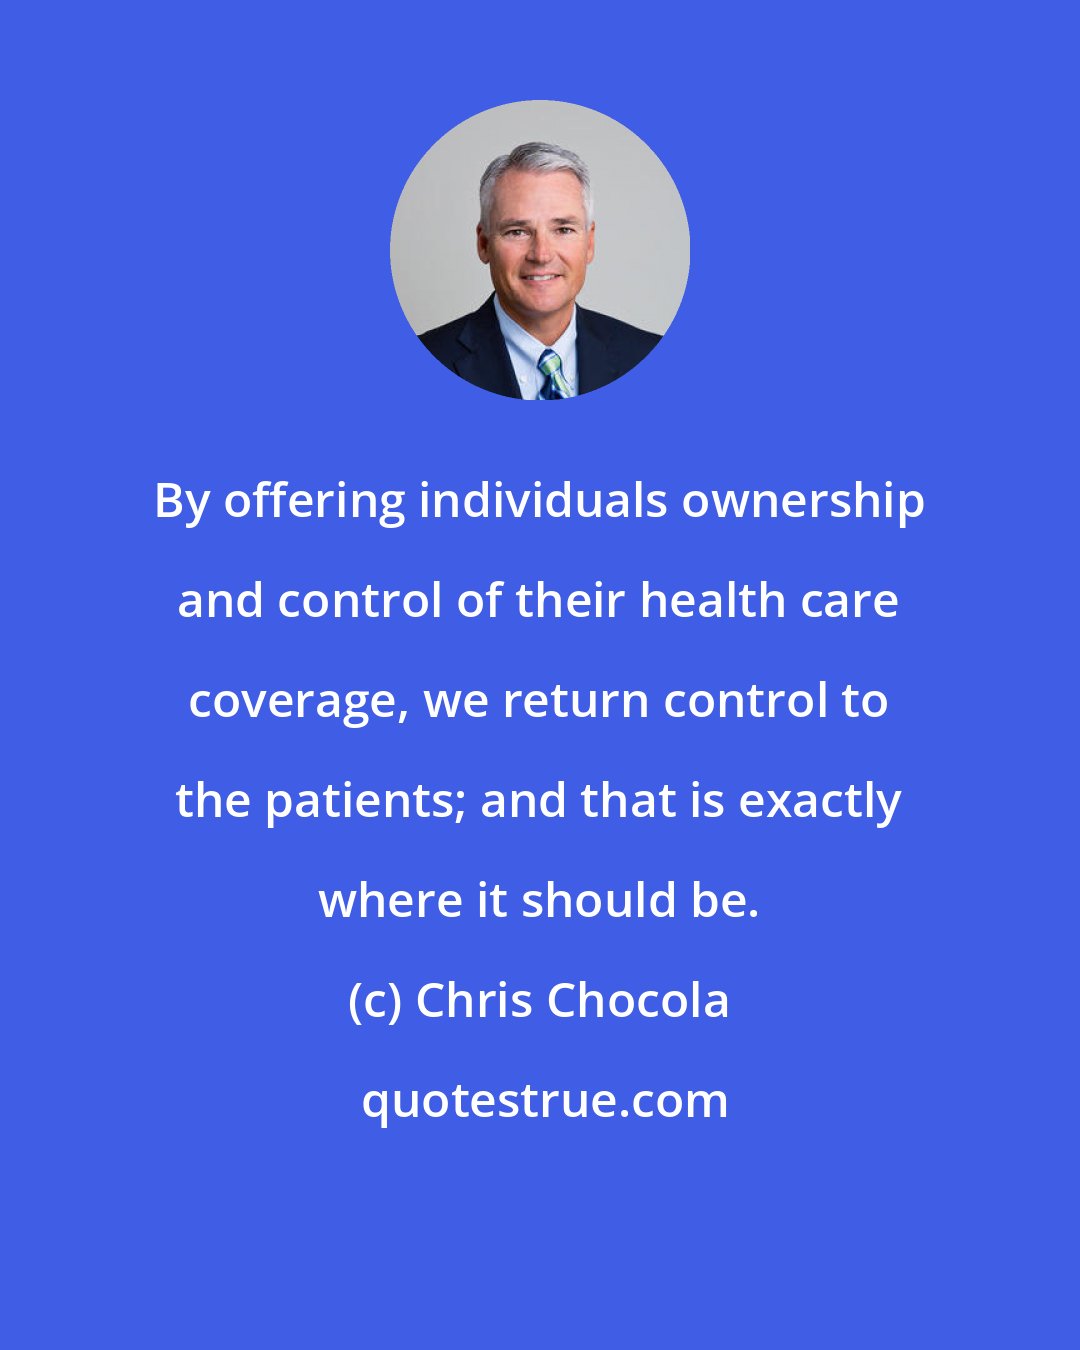 Chris Chocola: By offering individuals ownership and control of their health care coverage, we return control to the patients; and that is exactly where it should be.